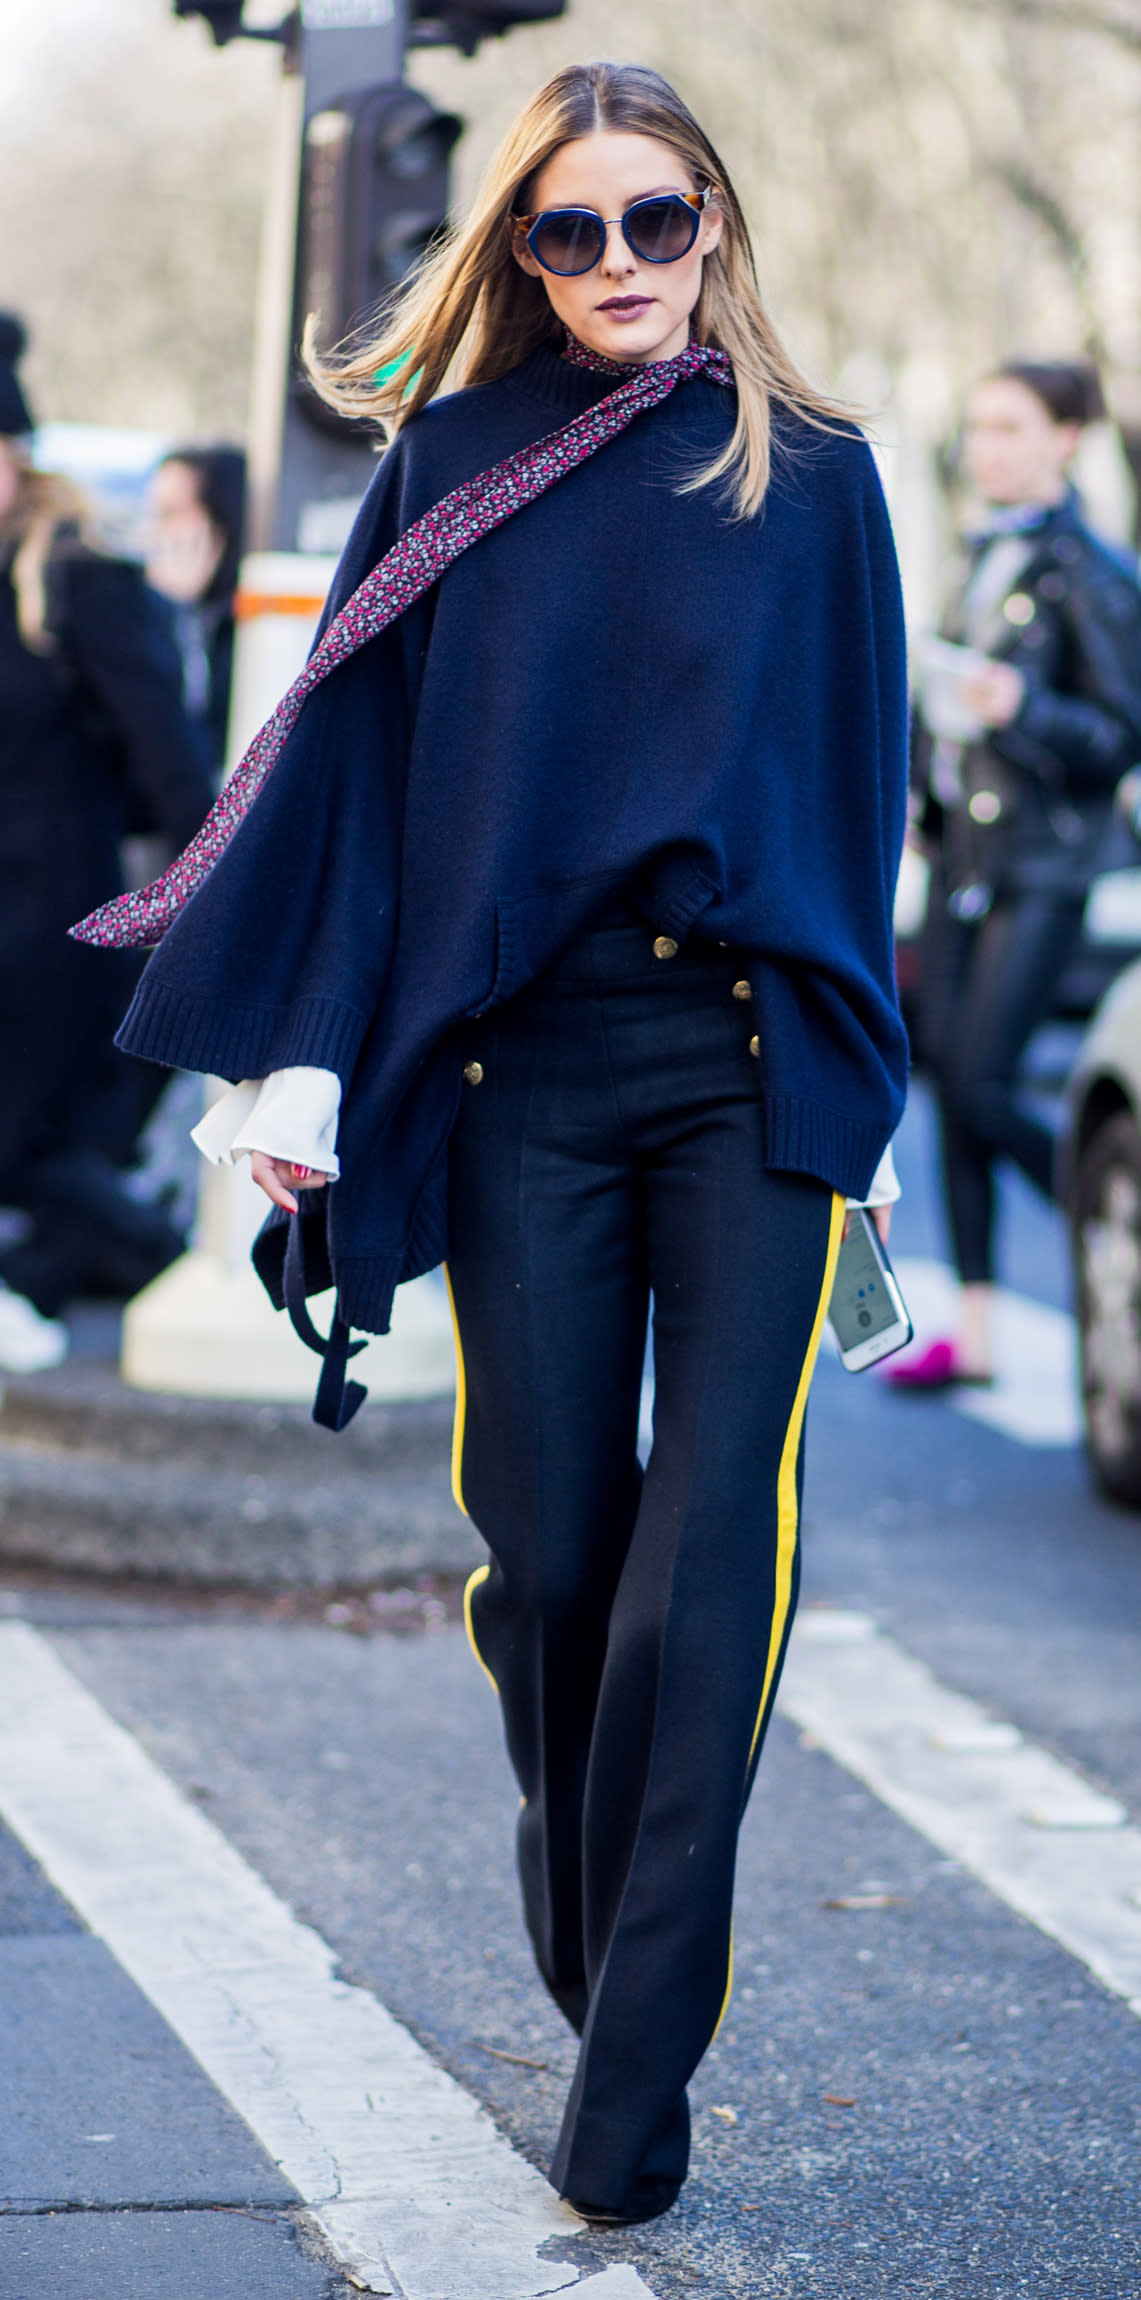 Olivia Palermo's Street Style and Leather Overalls